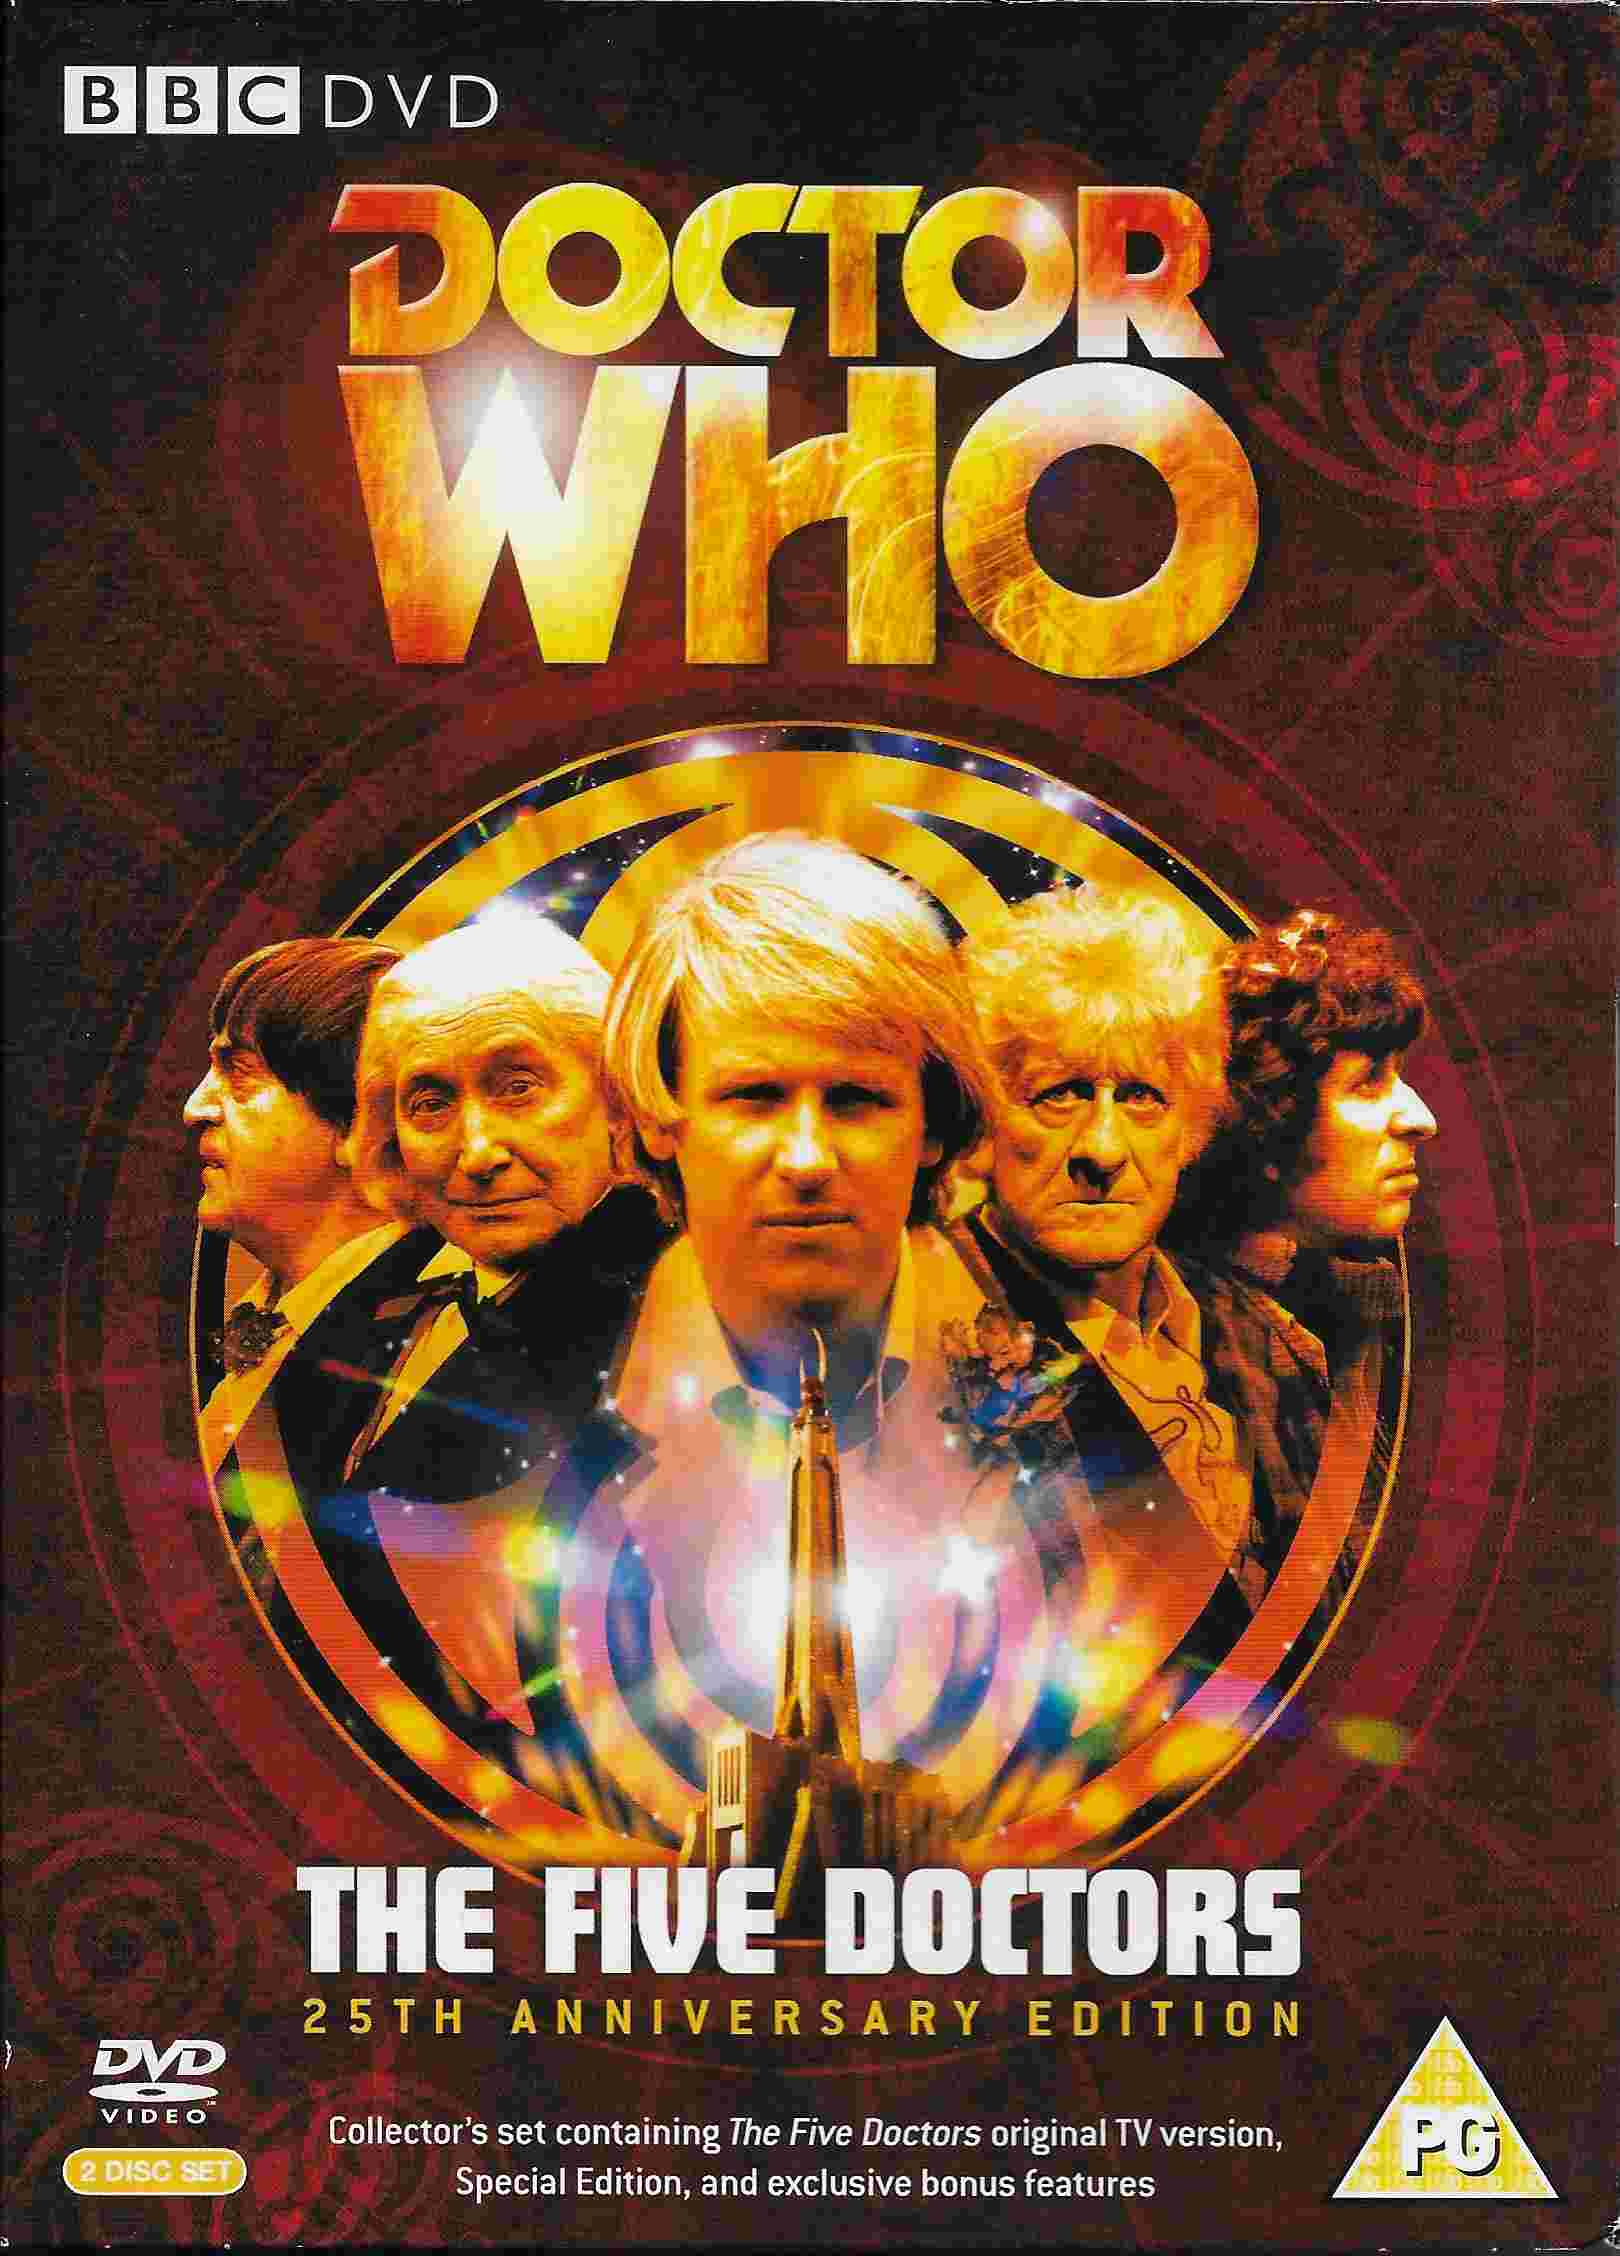 Picture of BBCDVD 2450 Doctor Who - The five Doctors by artist Terrance Dicks from the BBC records and Tapes library